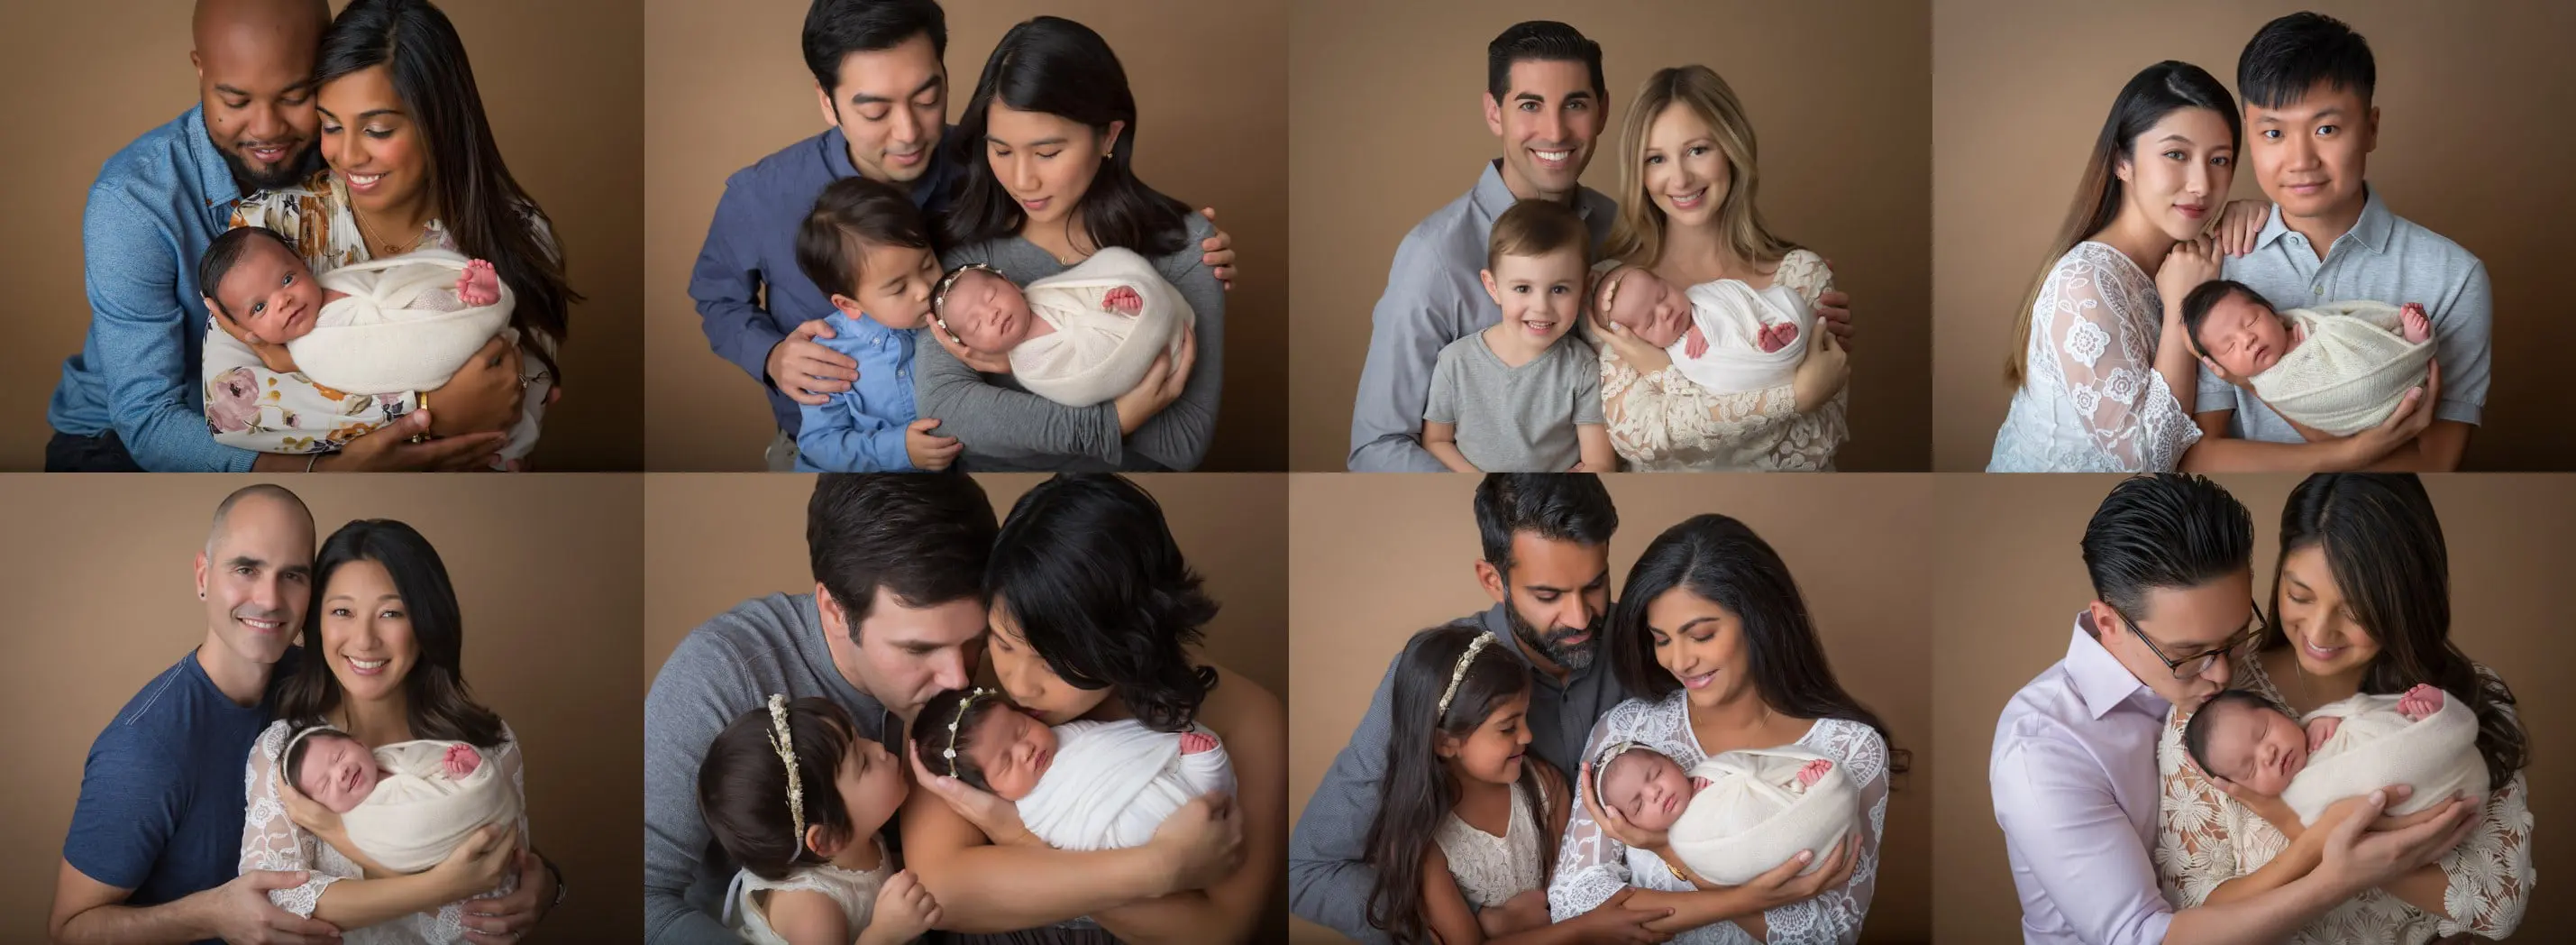 collage of new parents holding their newborn baby girl or boy during a photoshoot